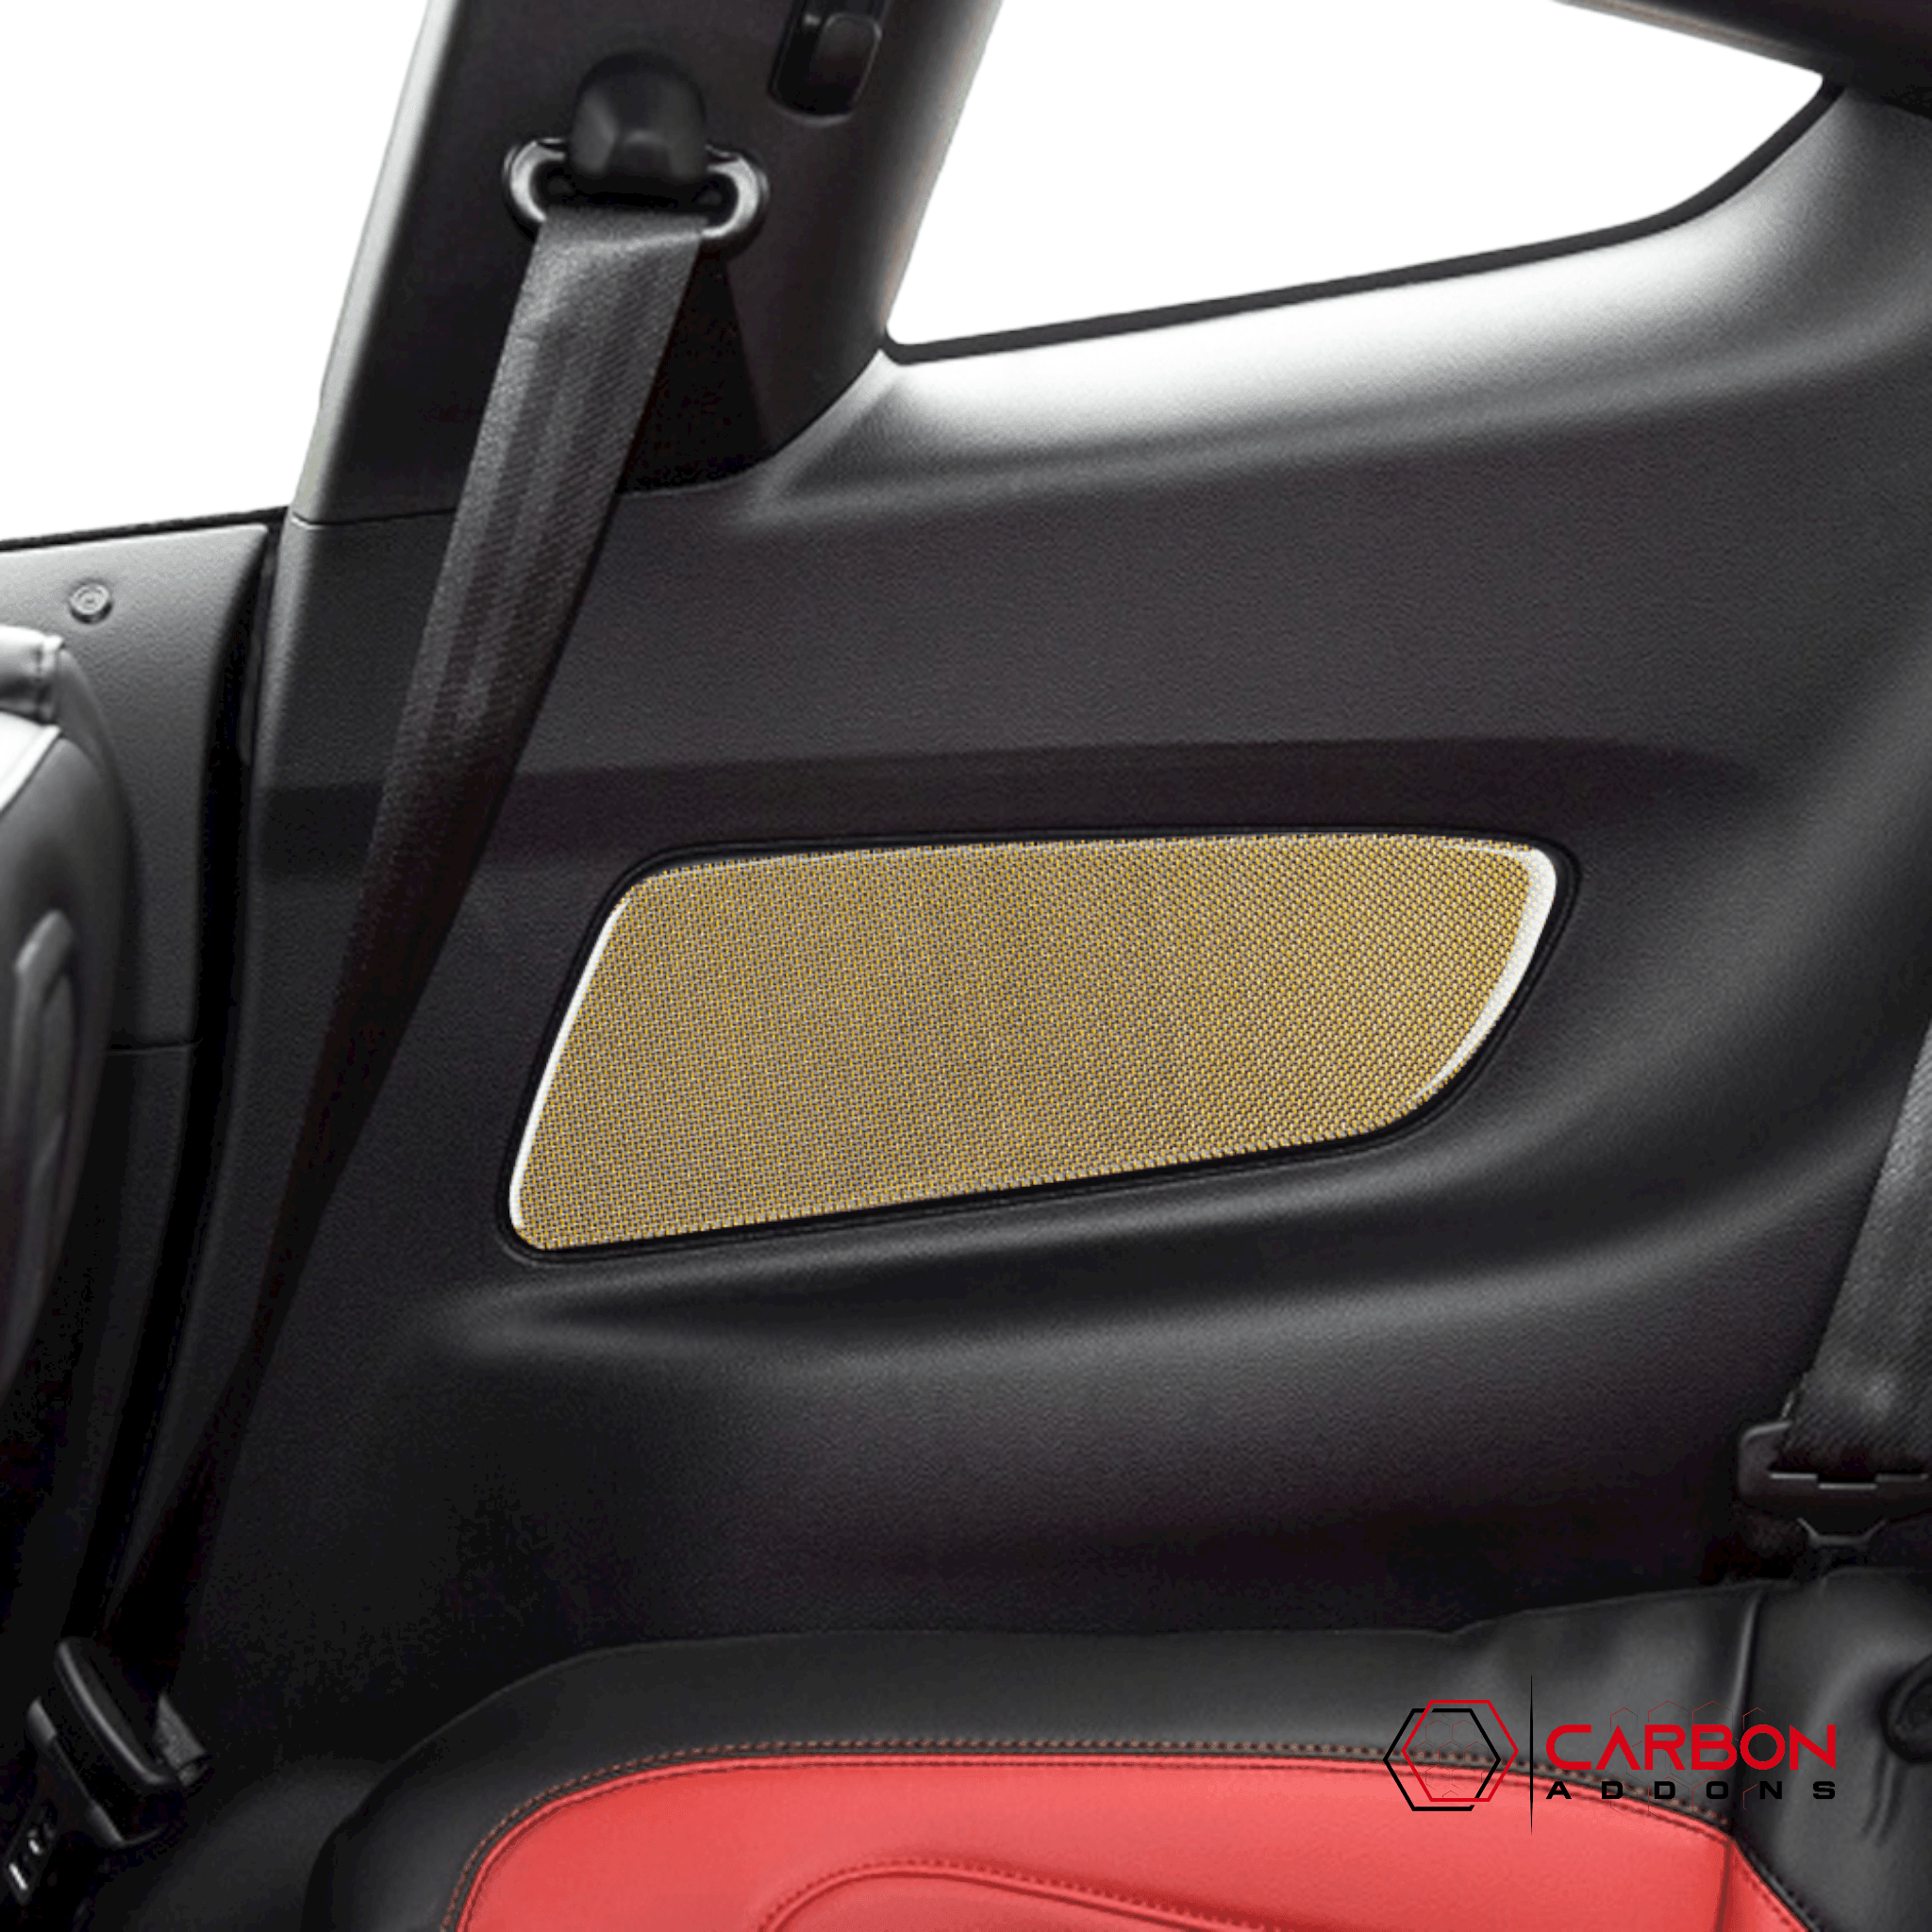 Reflective Carbon Fiber Front/Rear Door Panel Overlay for Ford Mustang 2015-2023 - carbonaddons Carbon Fiber Parts, Accessories, Upgrades, Mods